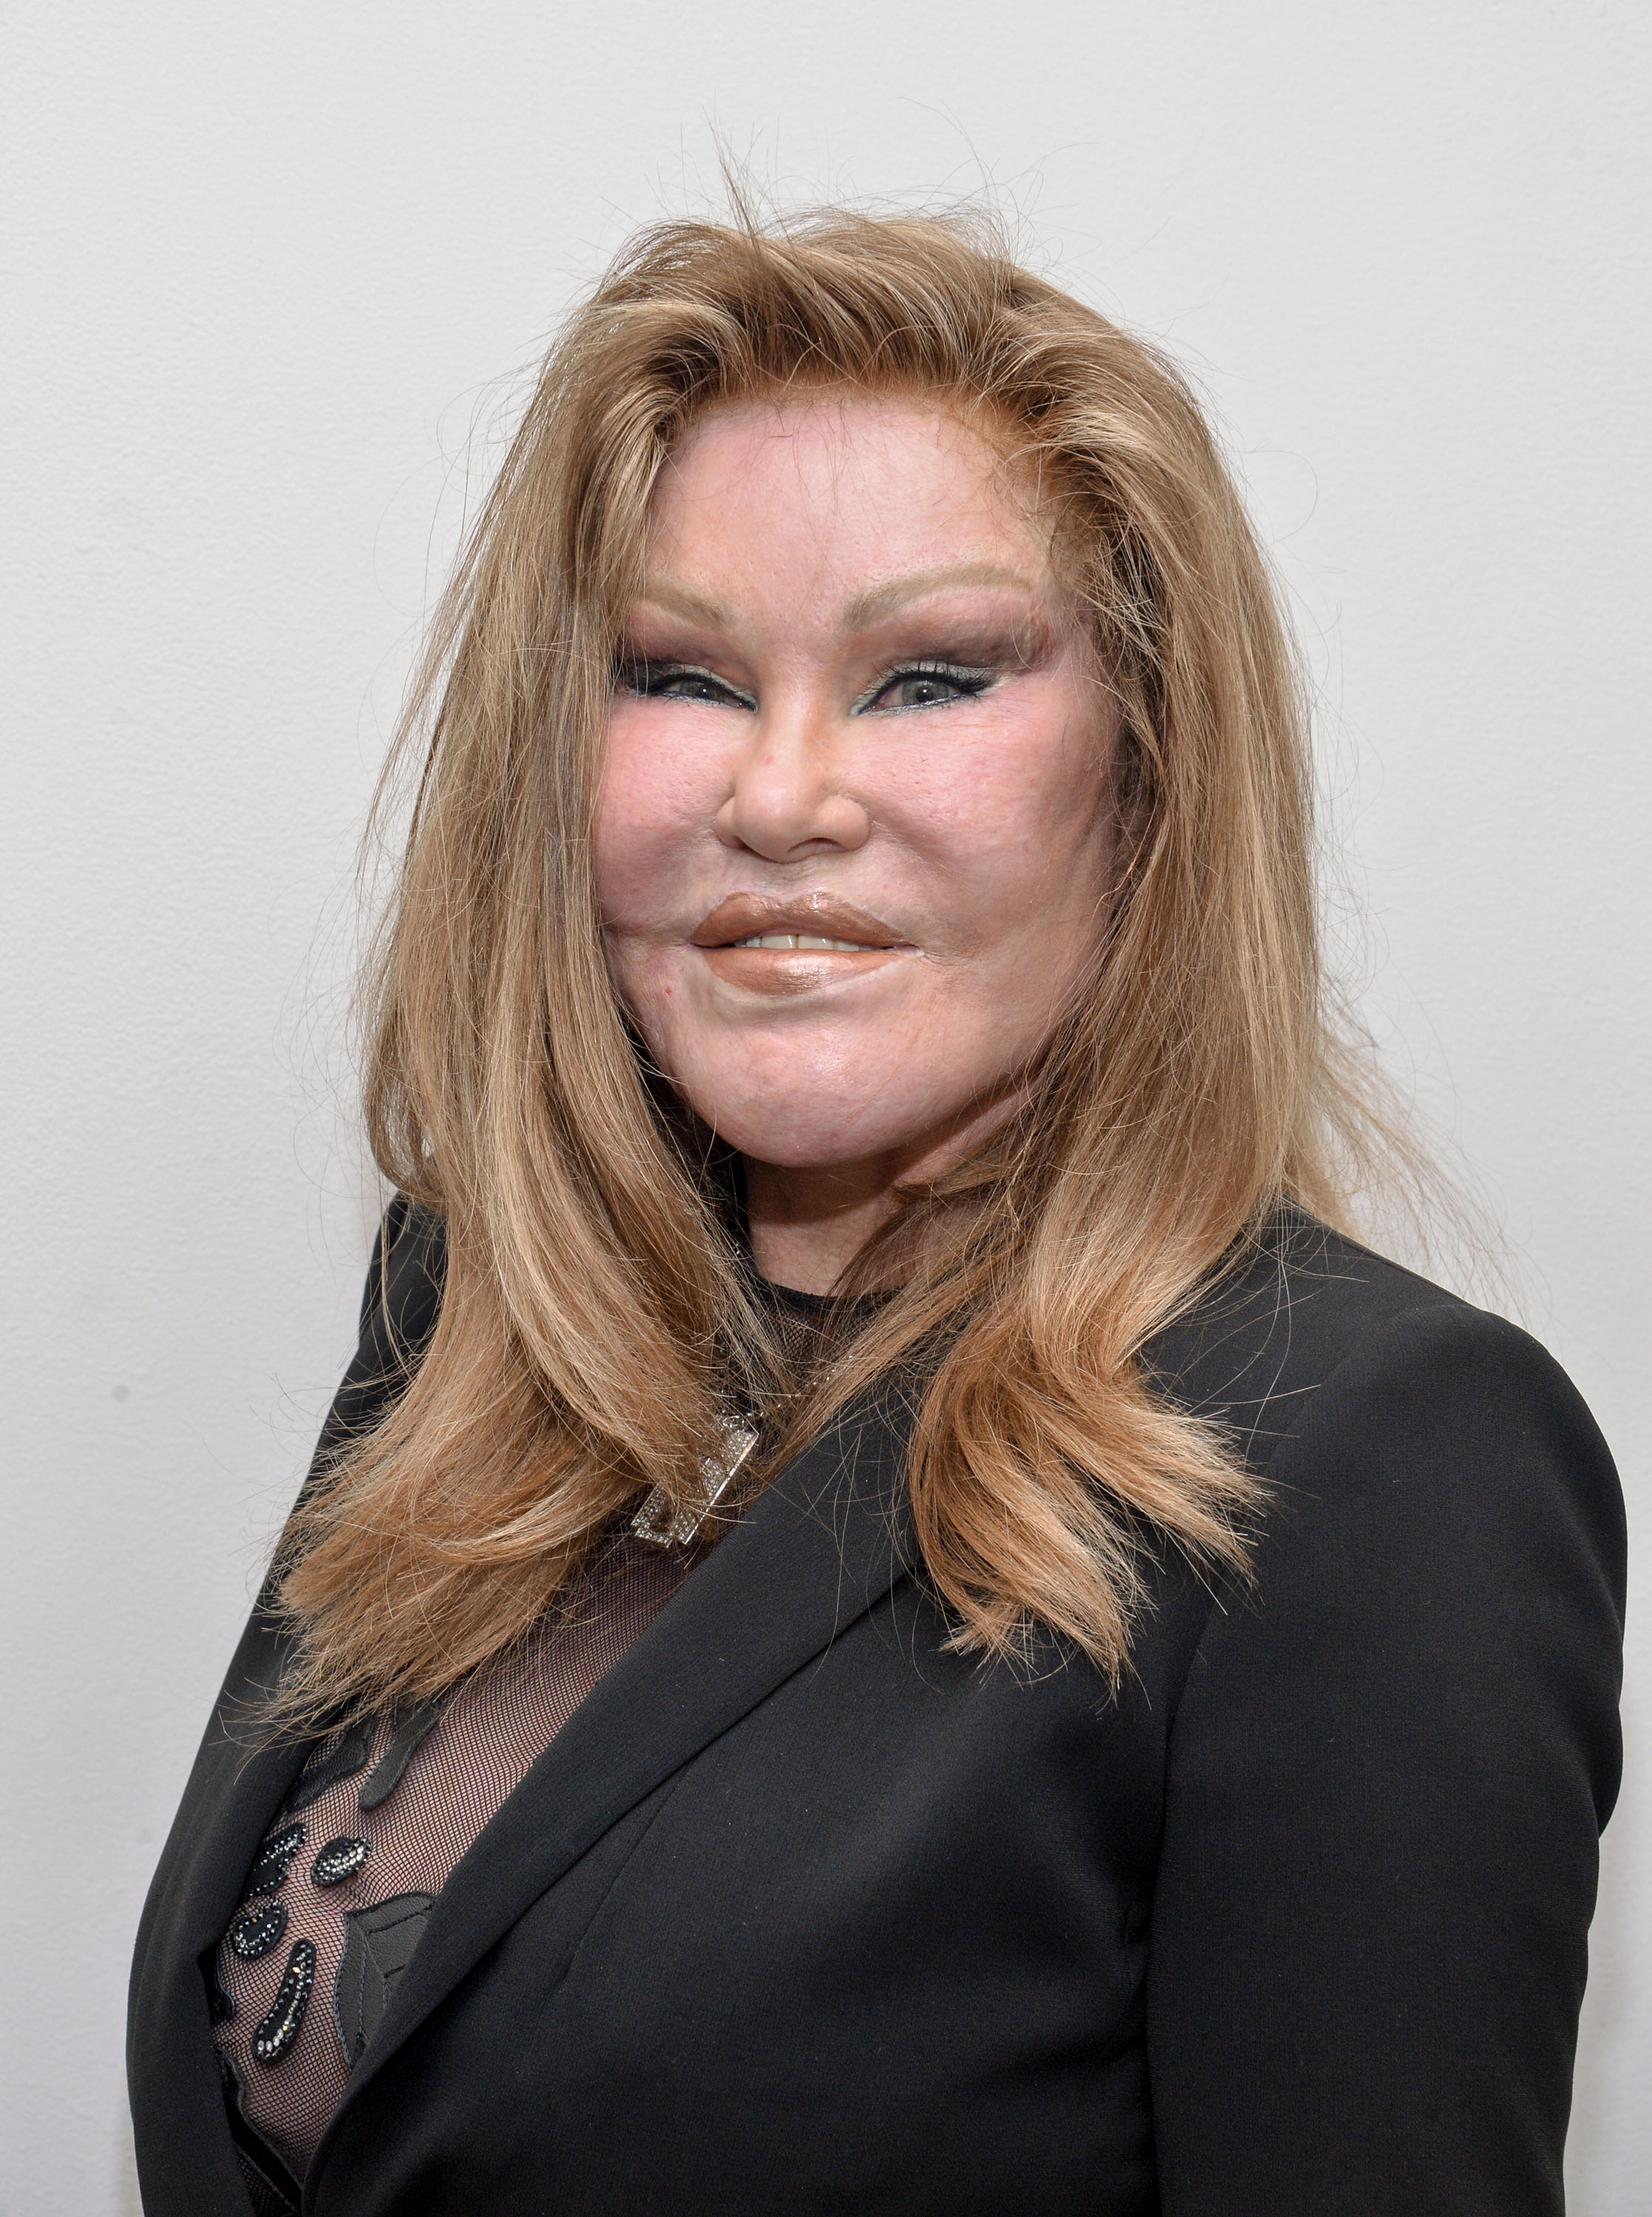 Jocelyn Wildenstein attends the Jean-Yves Klein: Chimeras Exhibition at Gallery Molly Krom in New York City, on October 8, 2015. | Source: Getty Images